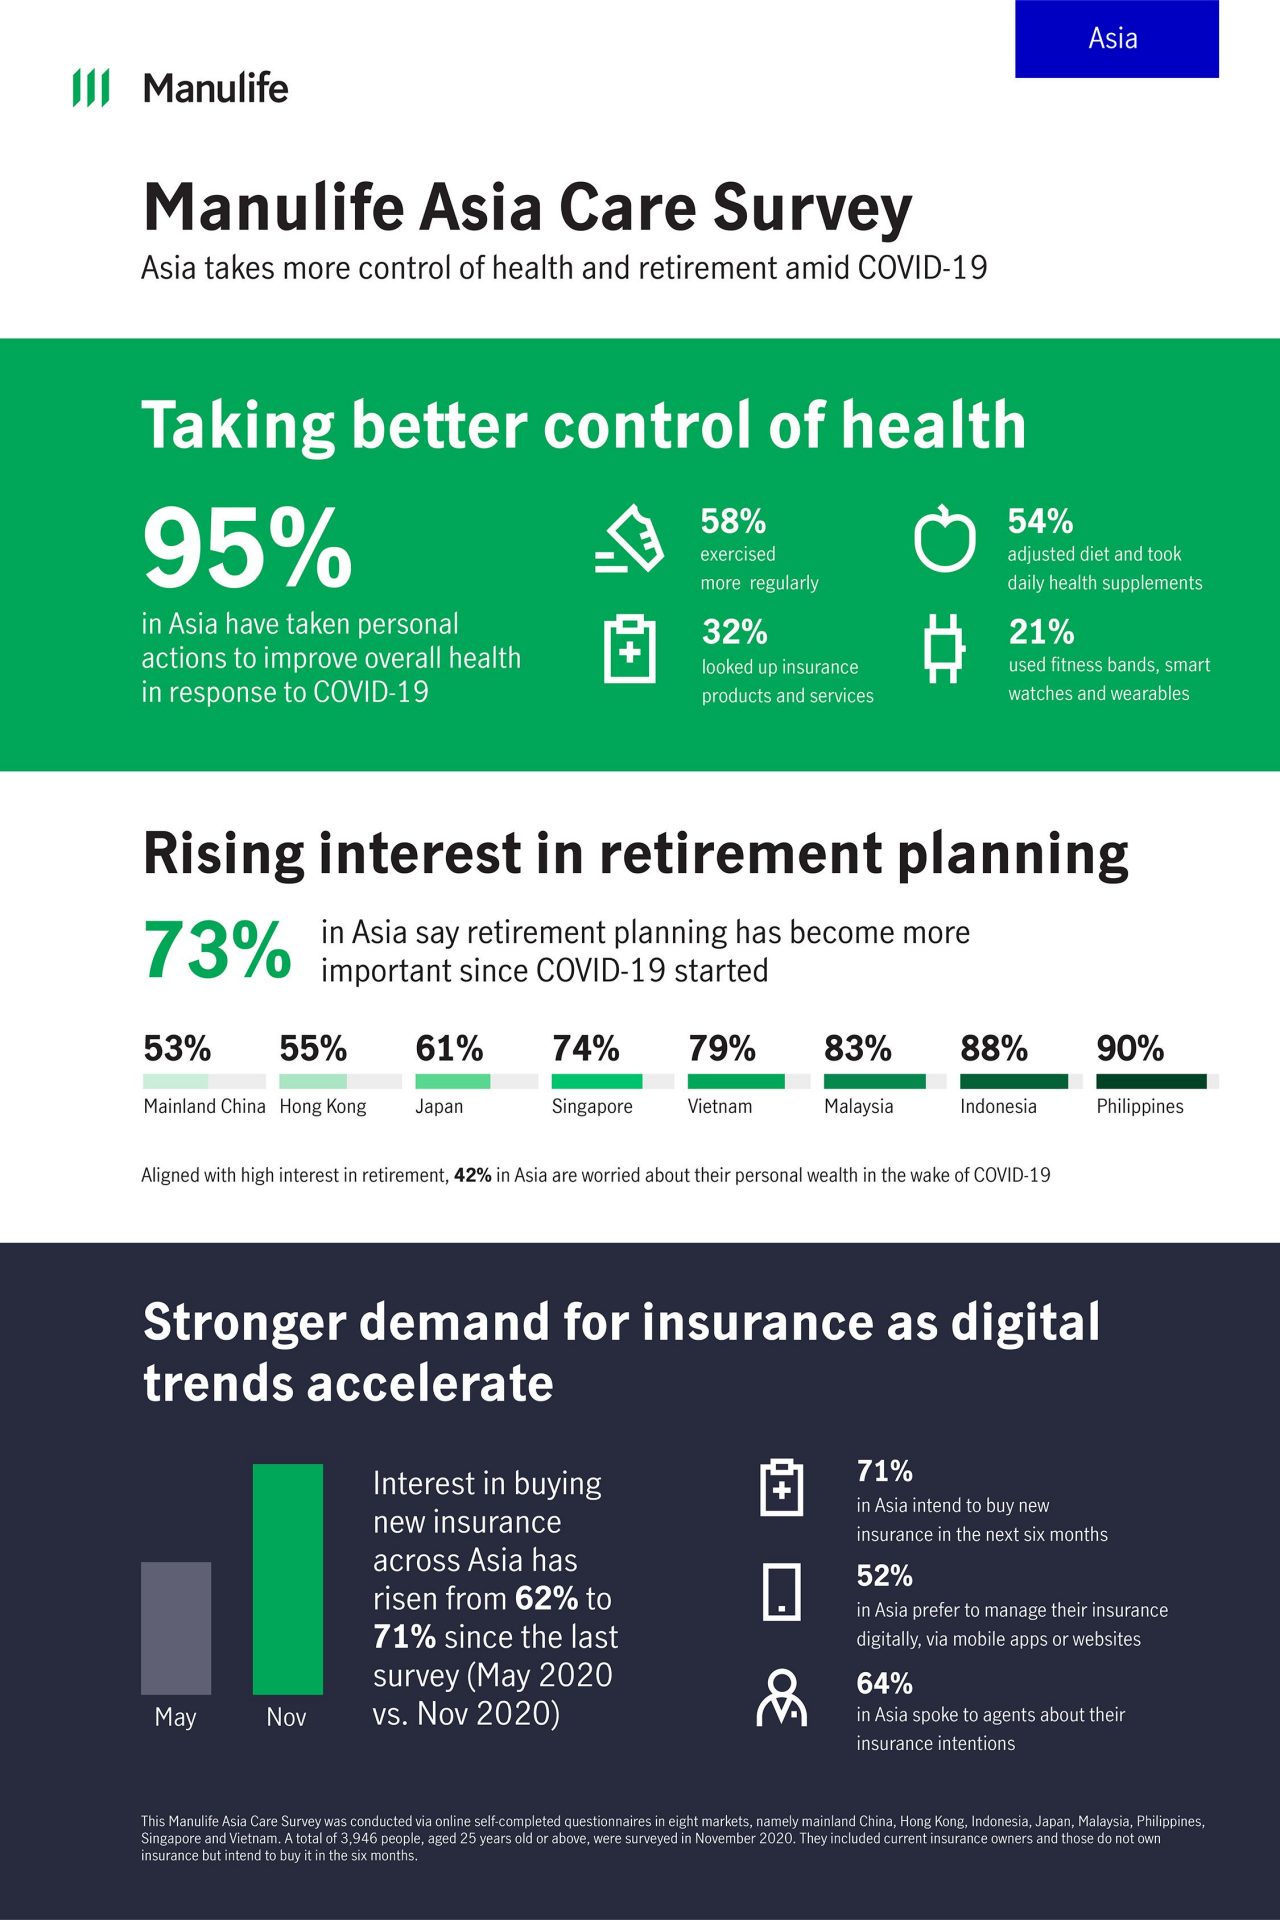 Inforgraphic illustrating that 95% in Asia have taken persoanl actions to improve overall health in response to COVID-19 and 75% in Asia say retirement planning has become more important since COVID-19